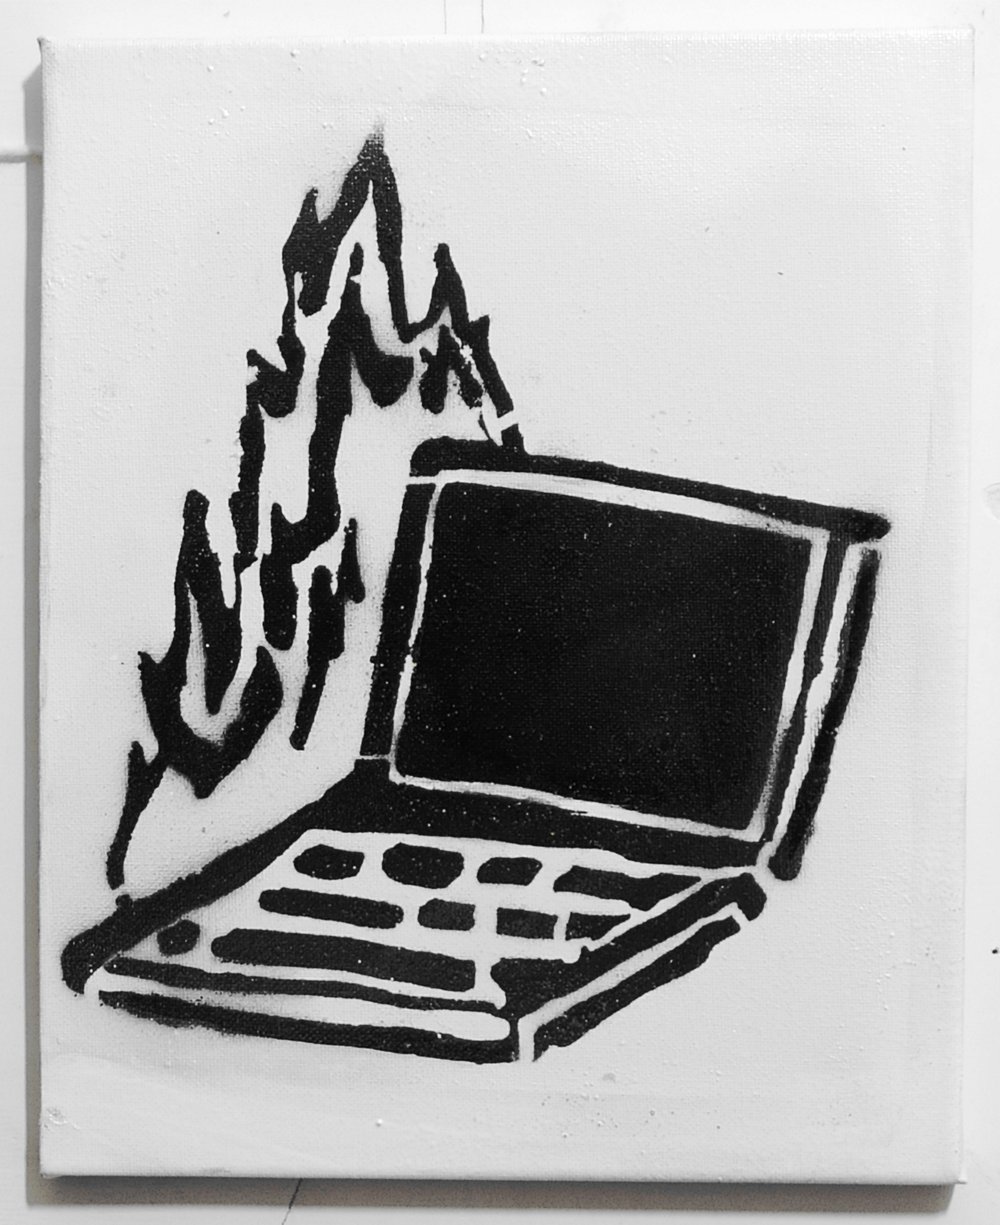 Image of Burning Pc - Stencil on Canvas